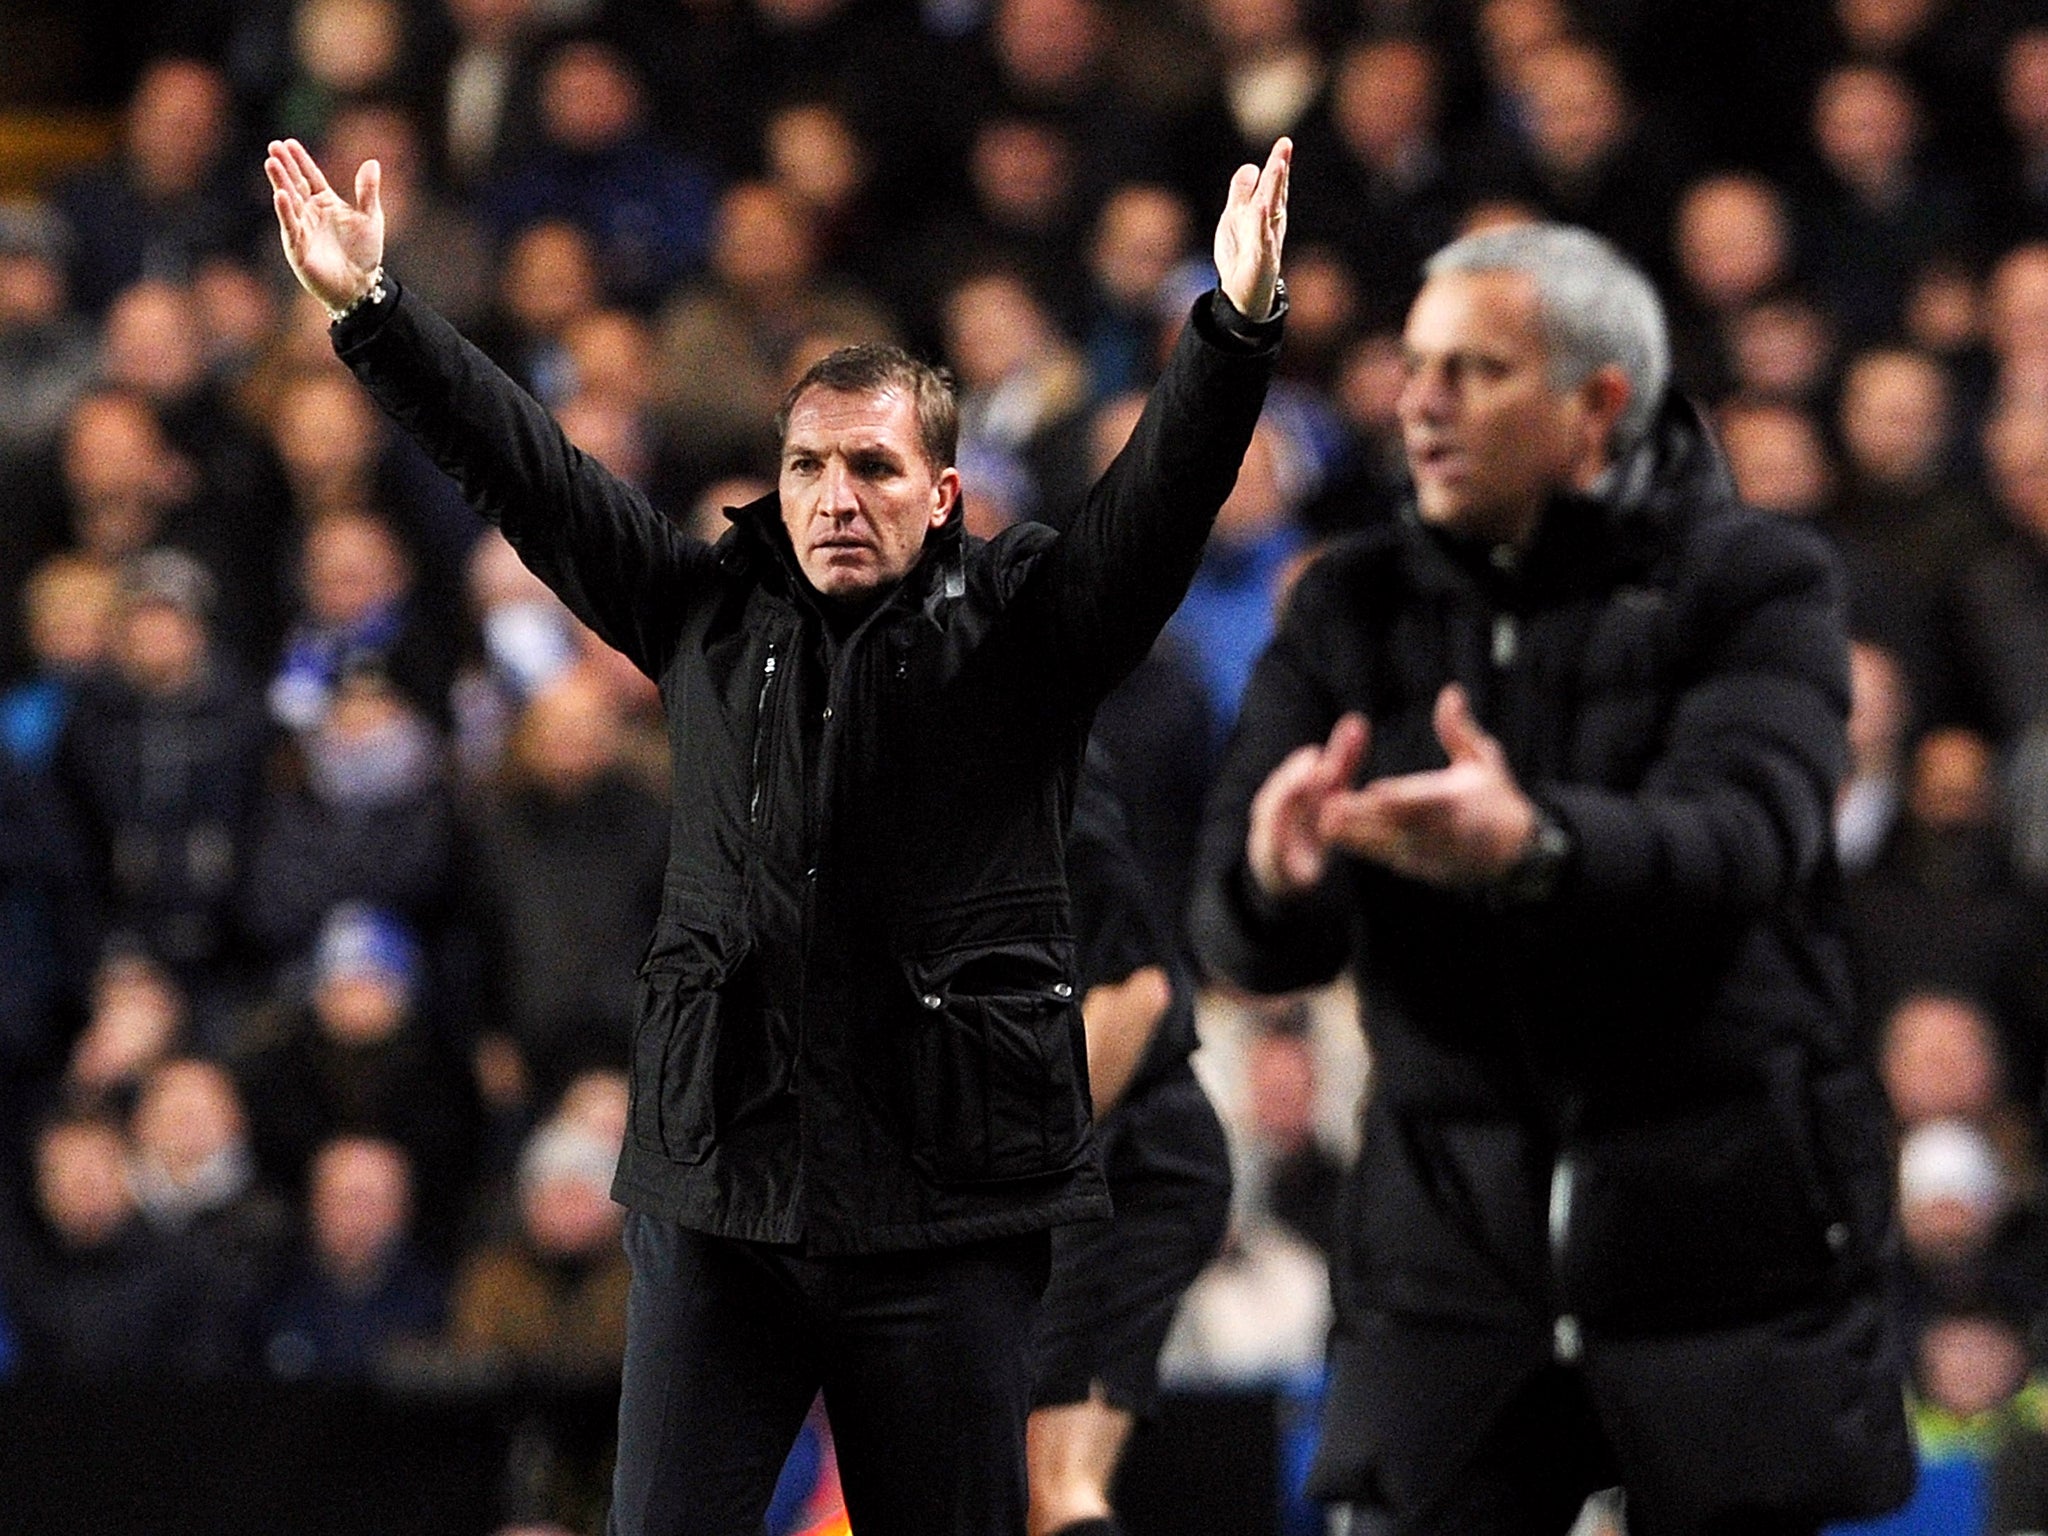 Liverpool manager Brendan Rodgers has stressed that his side aren't out of the title race despite back-to-back defeats